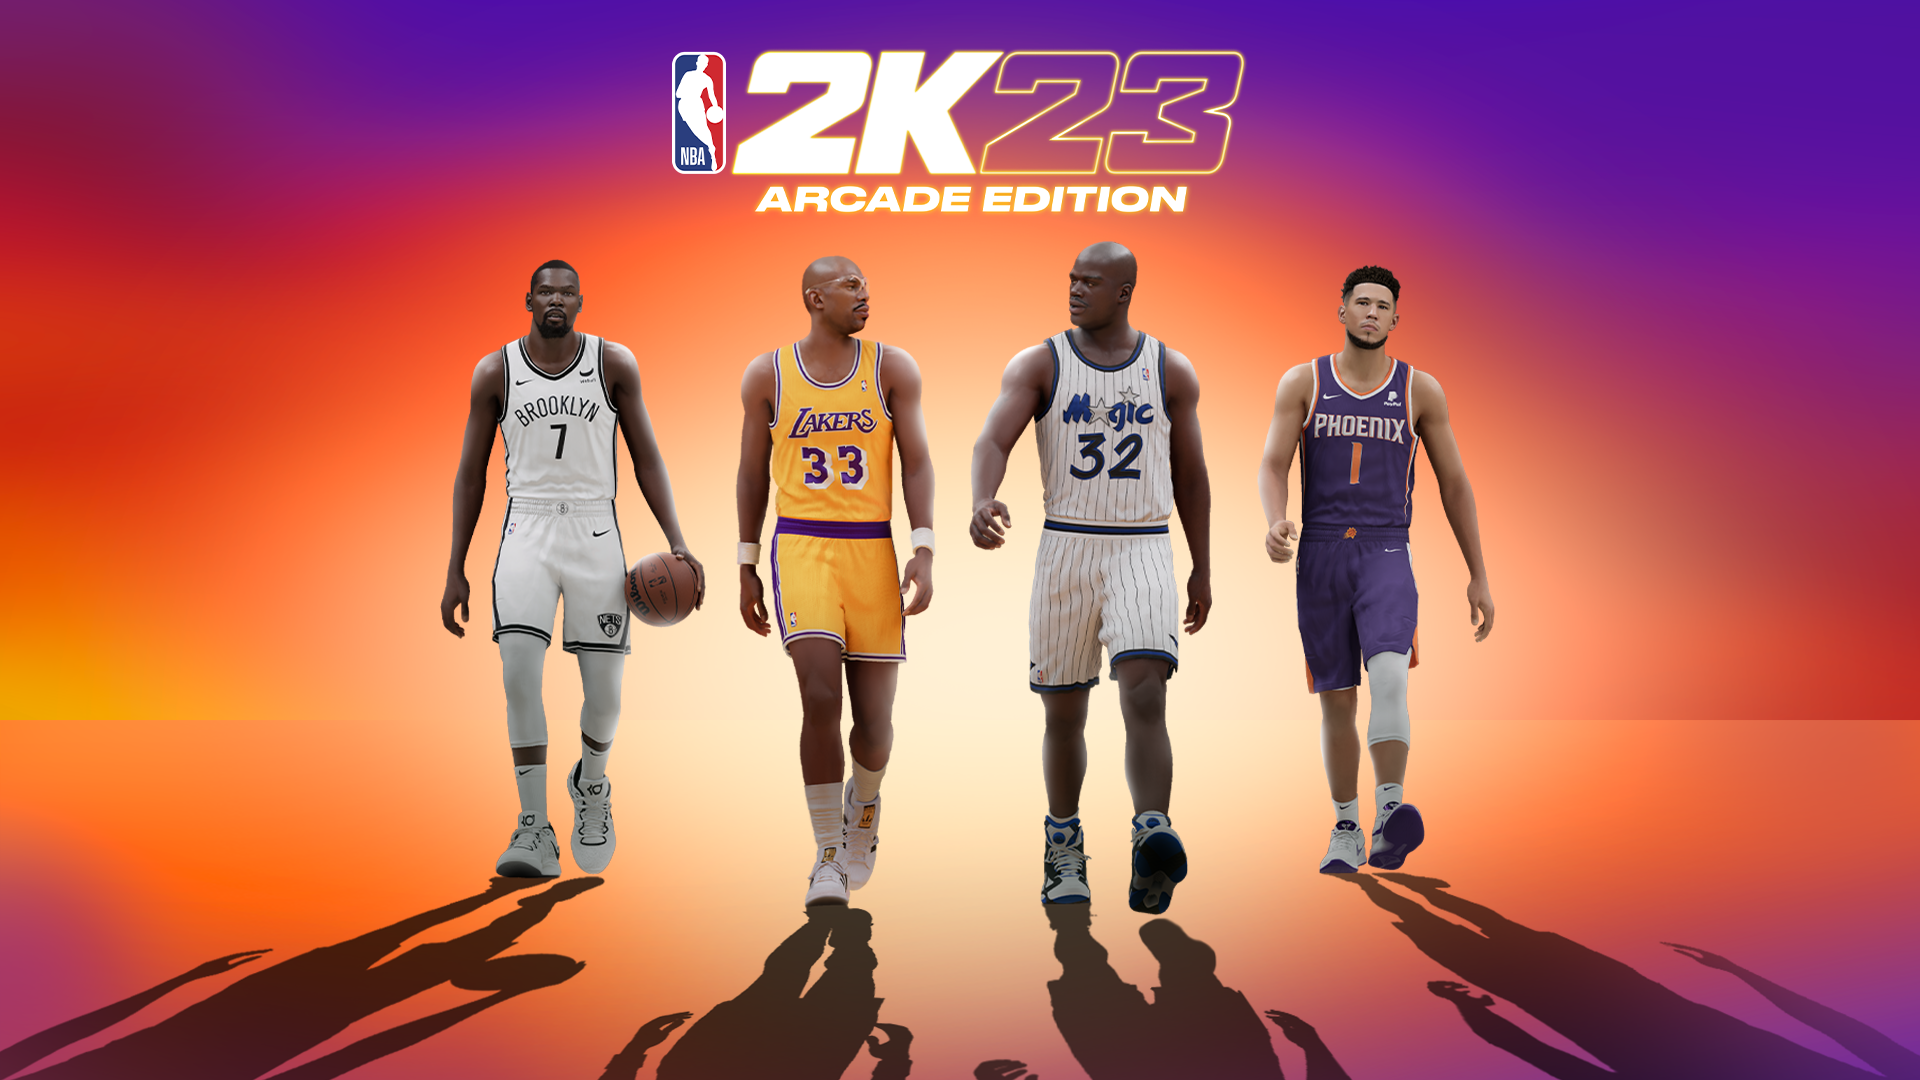 10 NBA 2K23 HD Wallpapers and Backgrounds